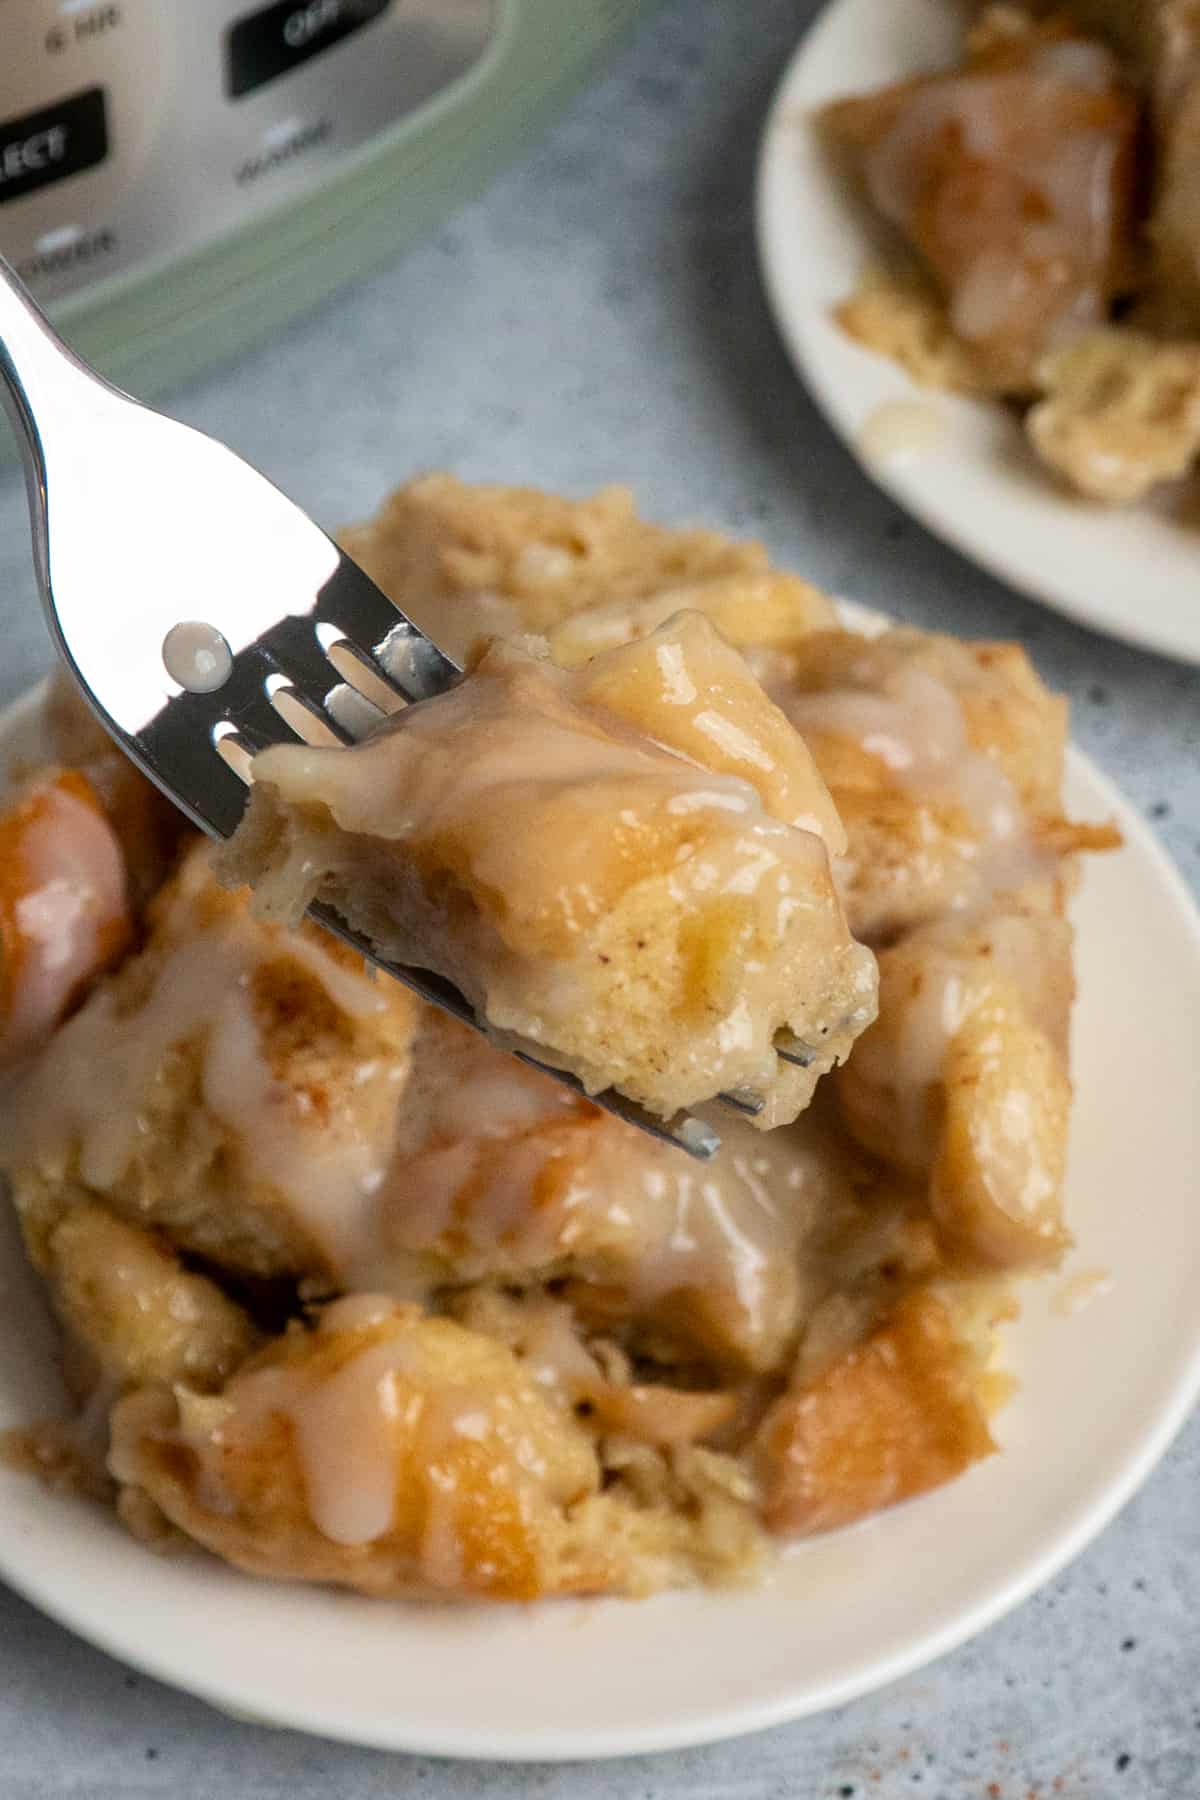 A fork holding a bite of bread pudding.